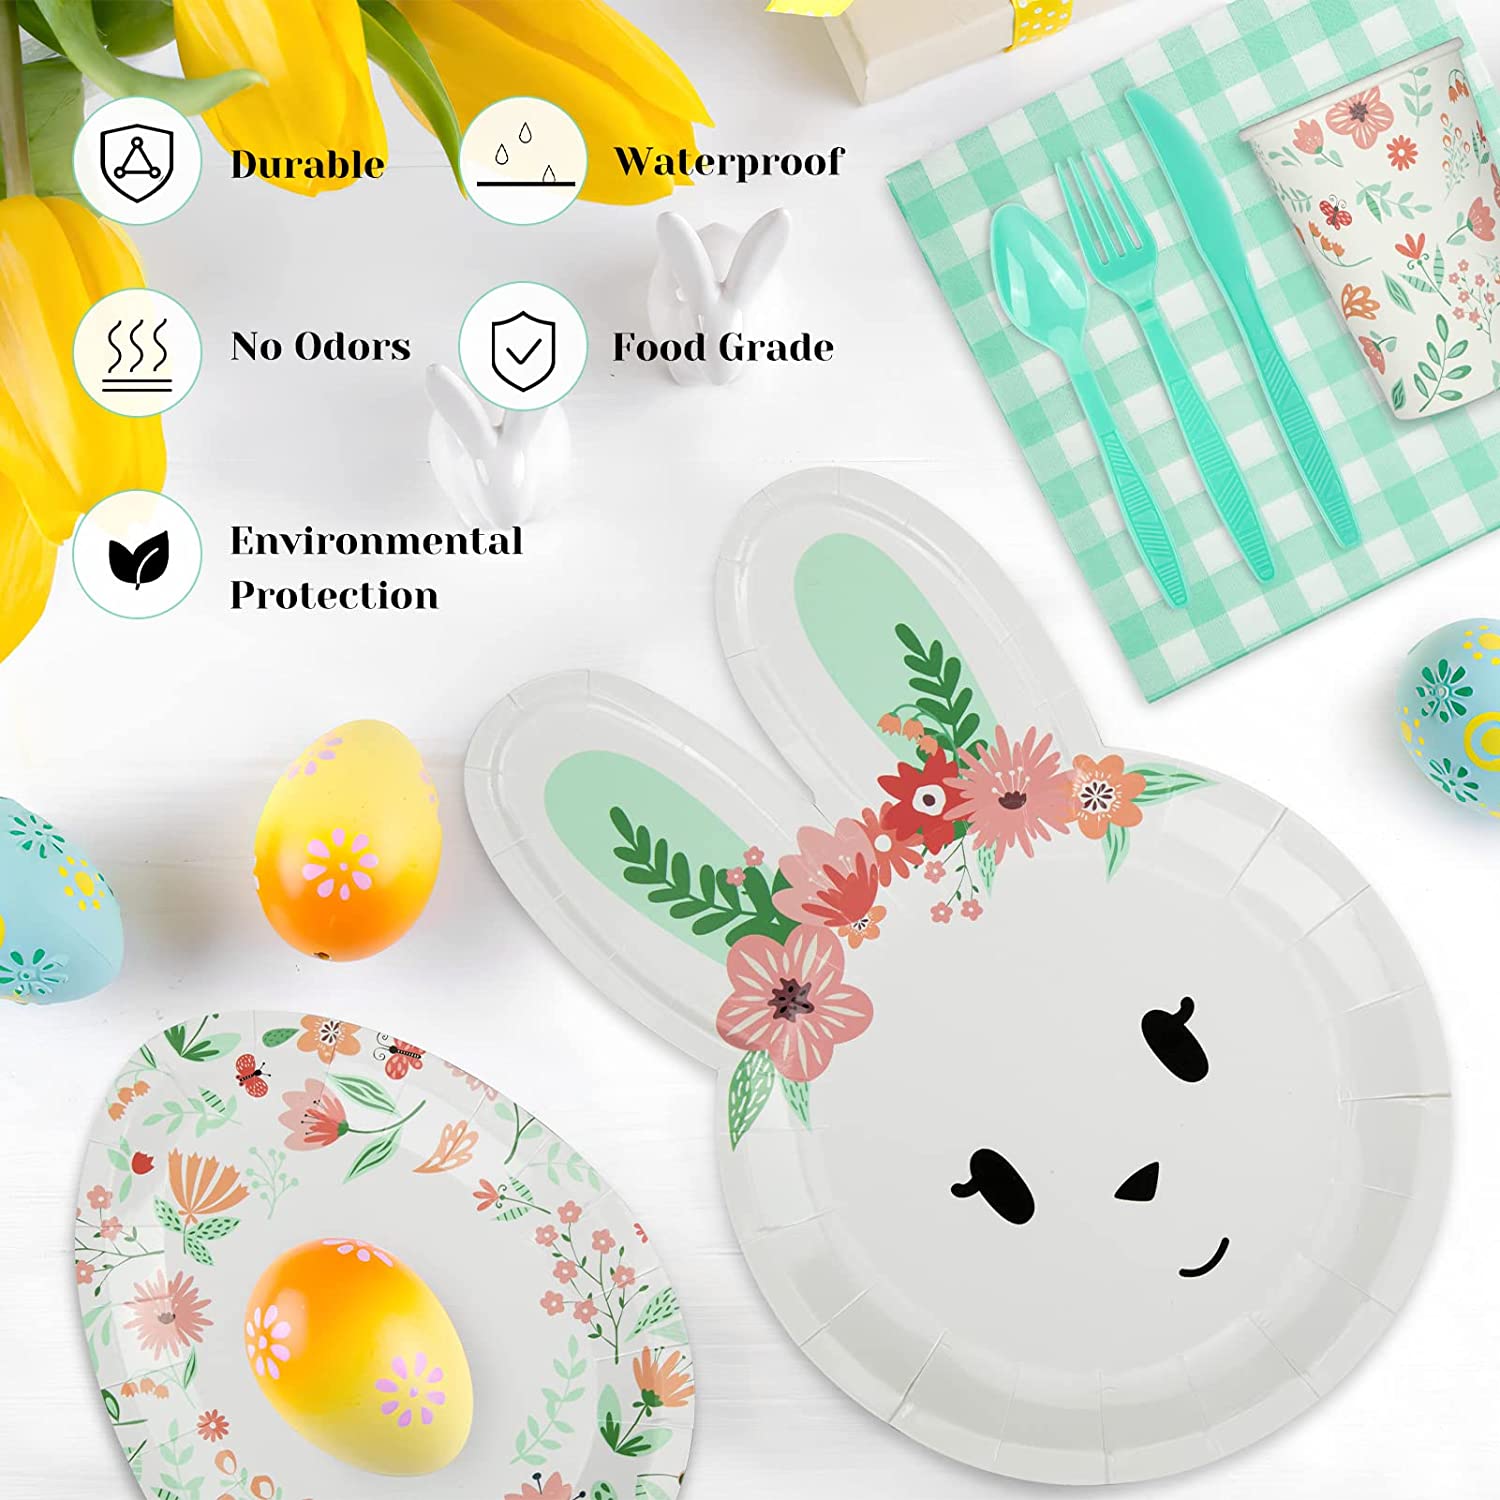 Fashionwu 117 Pcs Easter Disposable Dinnerware Set, Easter Green Decorations Paper Plates, Service for 16 Easter Party Supplies Includes Plates Cups Knives Forks Spoons Napkins Tablecloth - image 5 of 9